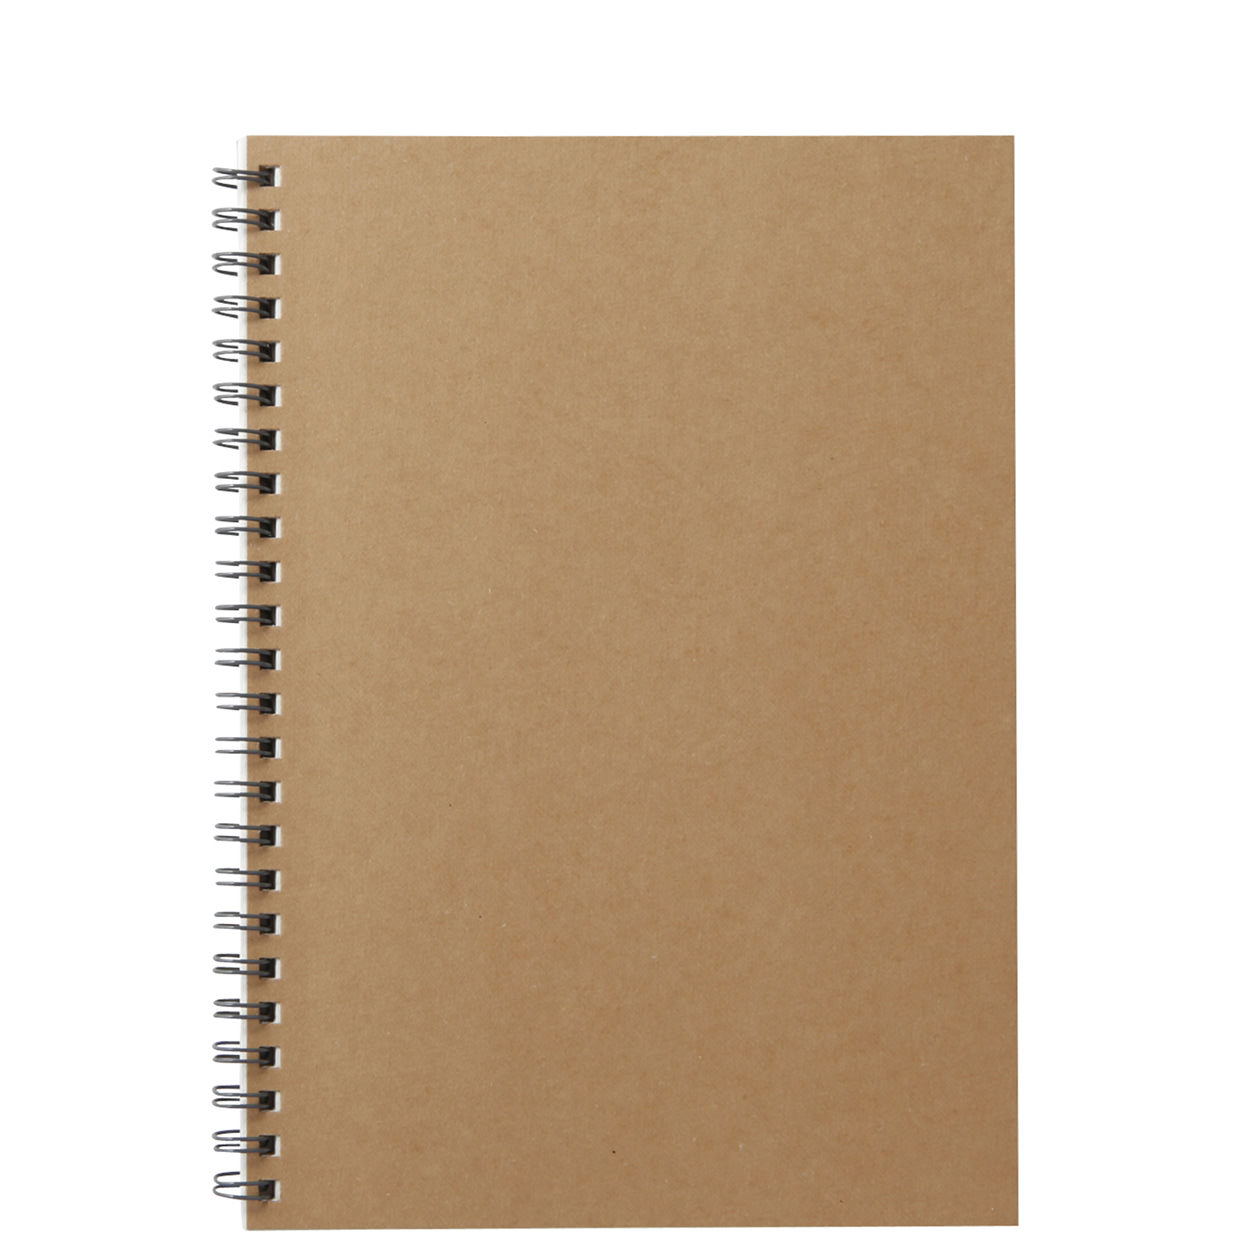 Planting Tree Paper Double Ring Notebook A5